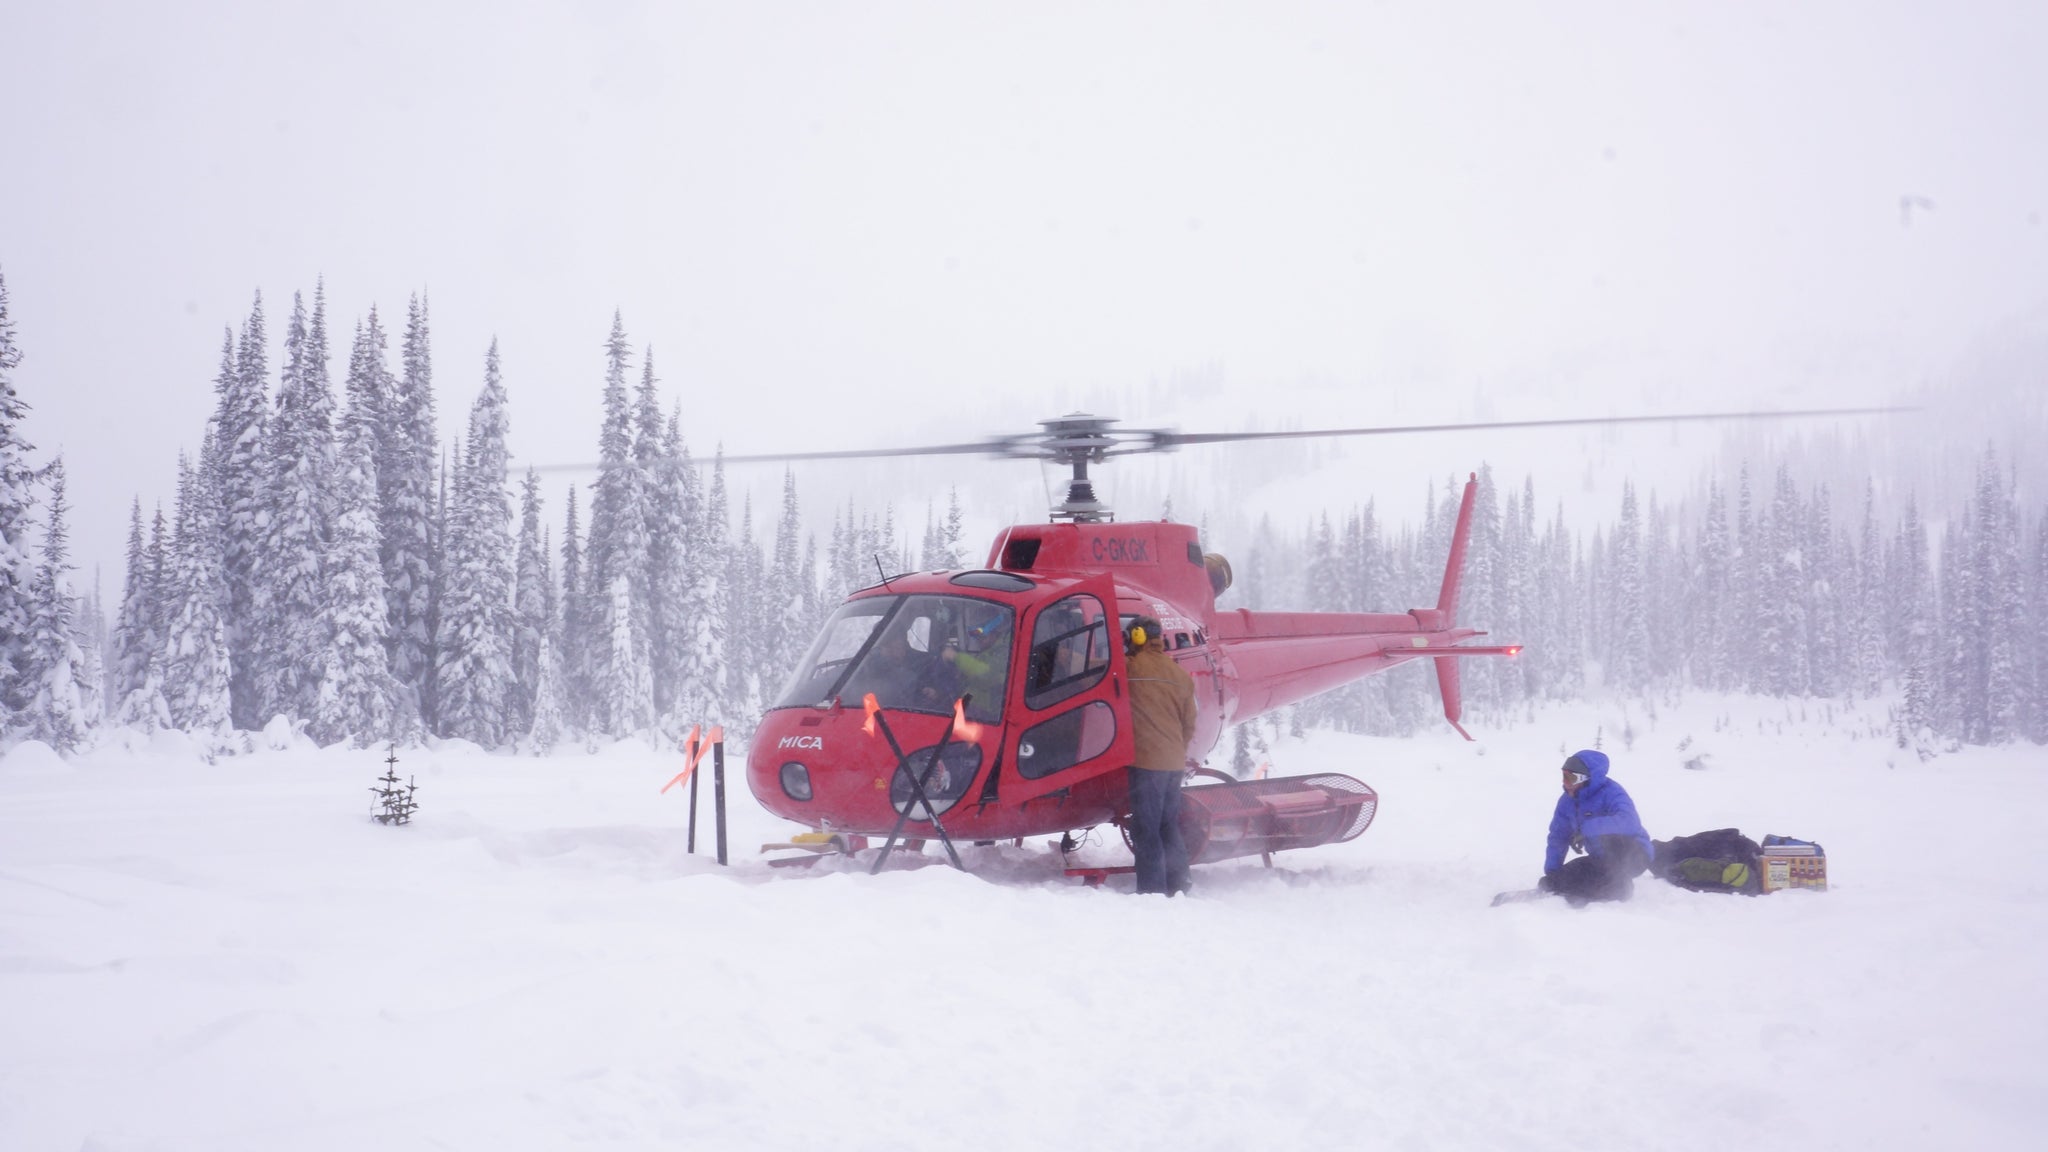 A helicopter drops off skiers, riders food and gear at a British Columbia Ski Lodge during a Blackbird Mountain Guides Trip.